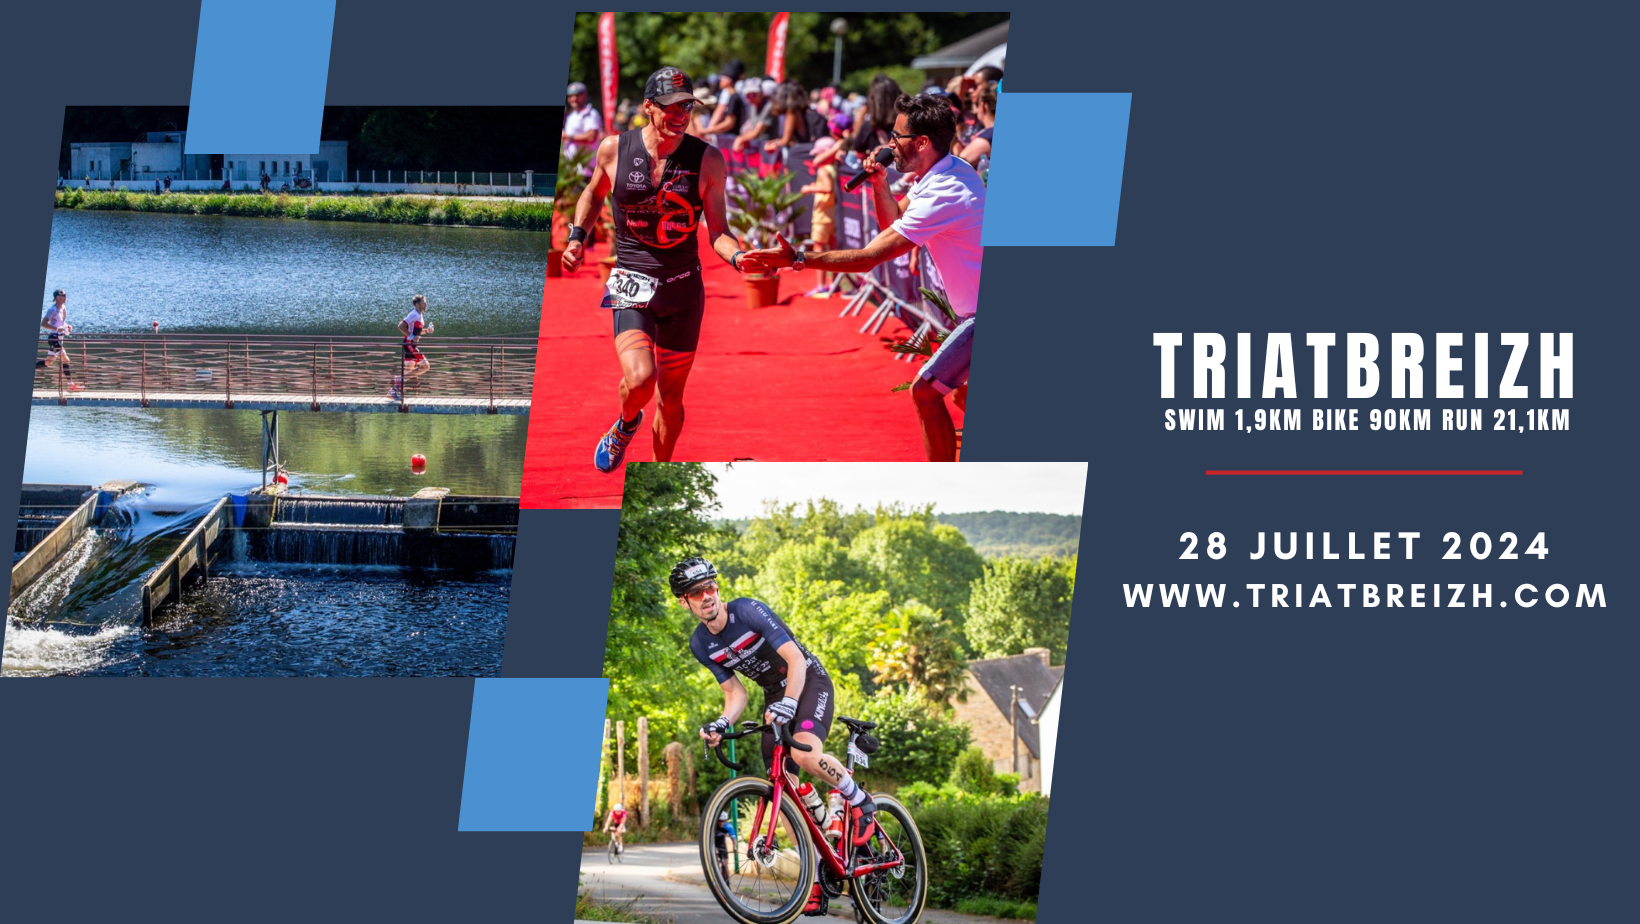 Triathlon sports facebook cover in navy red black geometric style